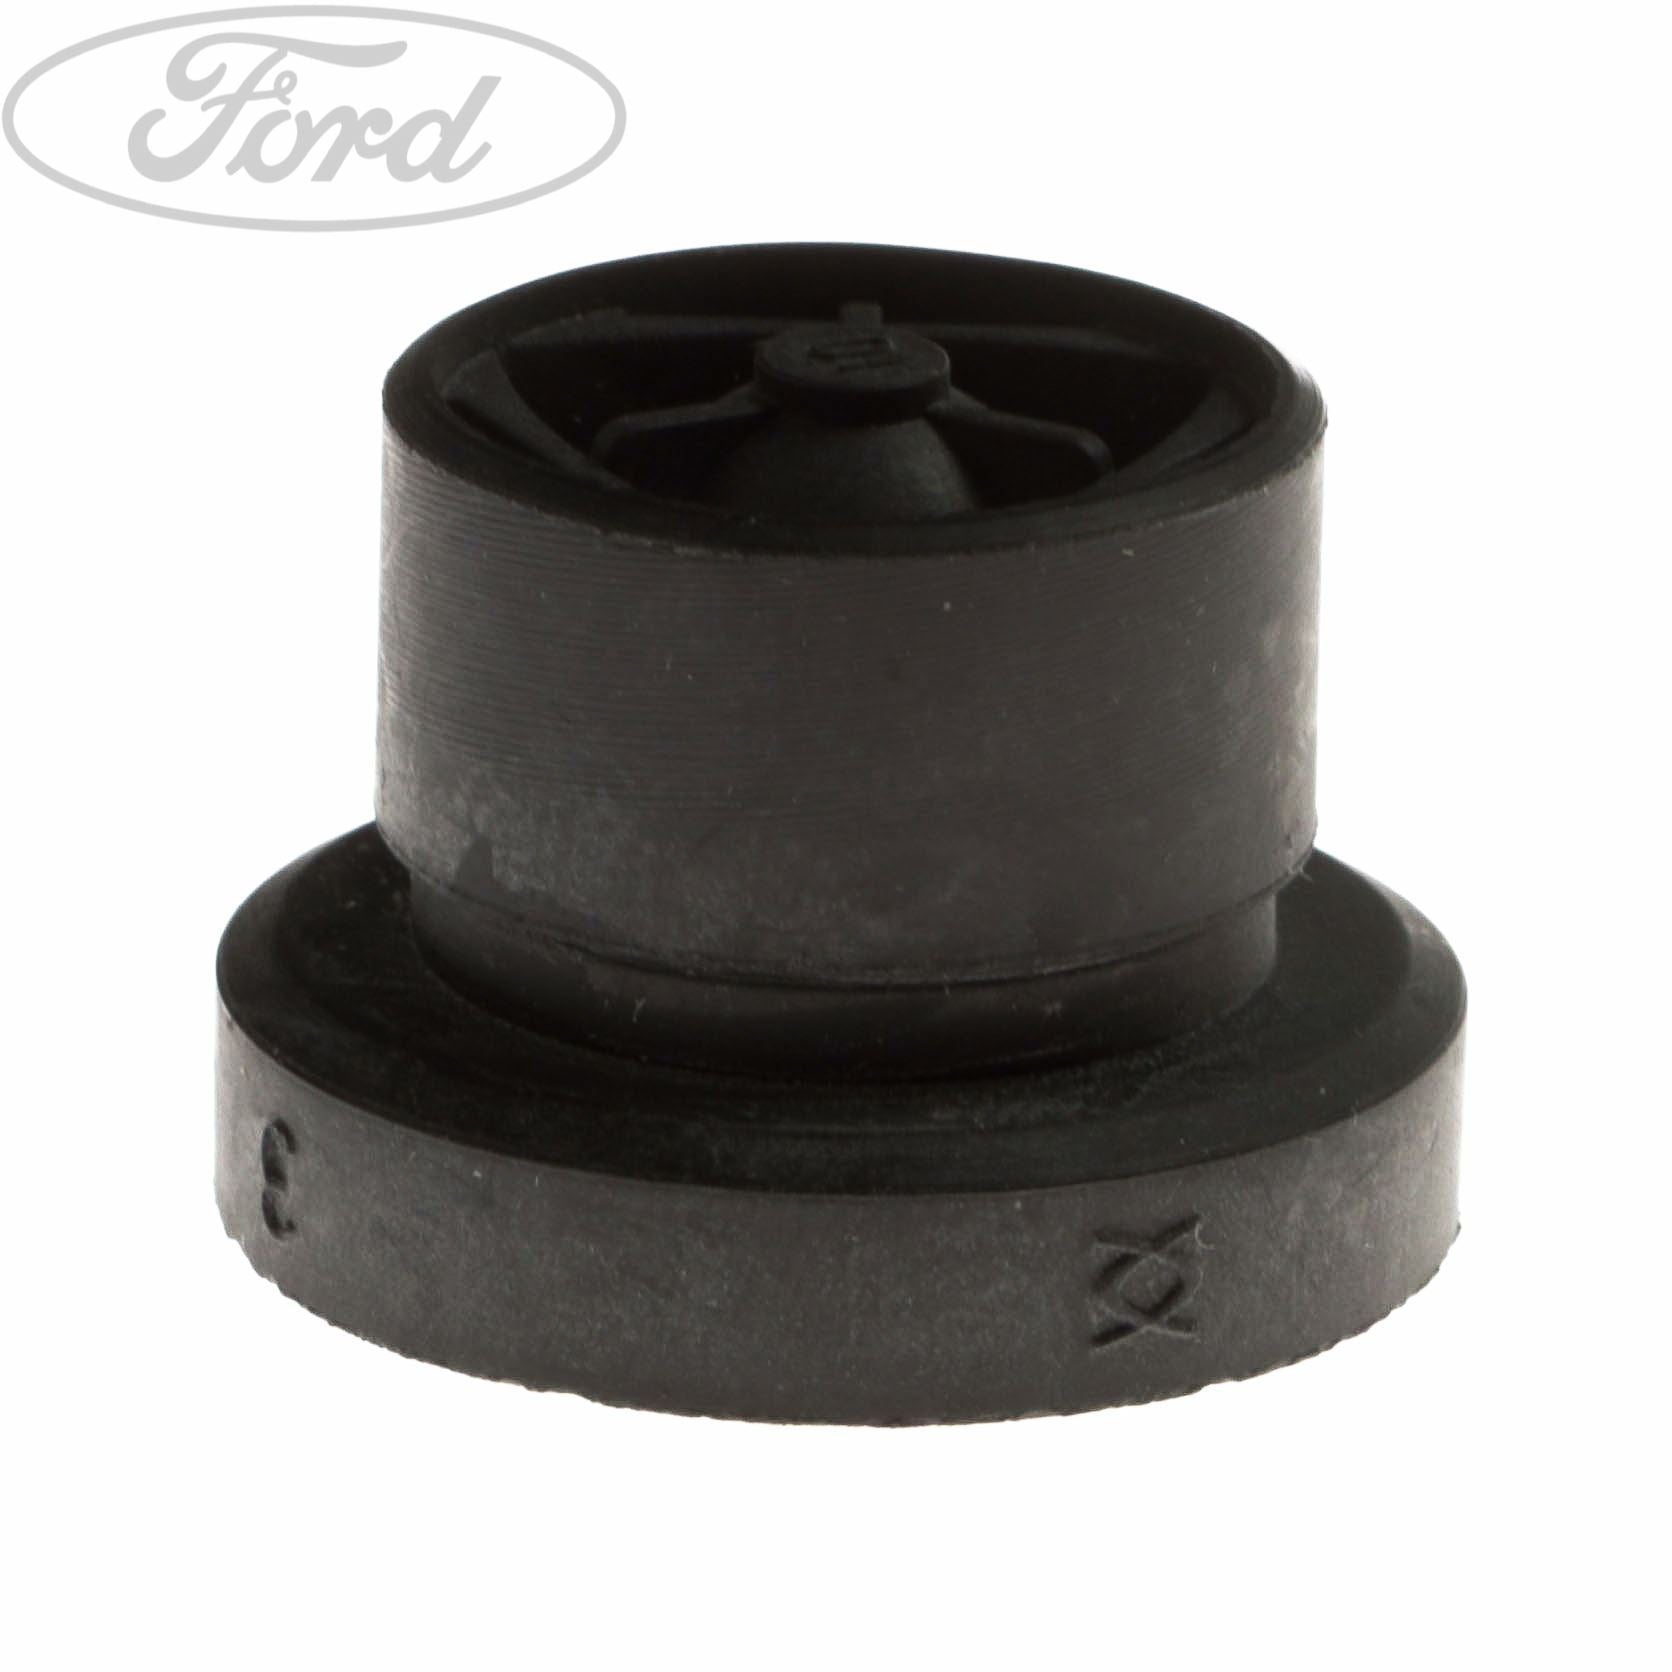 Ford CYLINDER HEAD COVER GROMMET - 1755733